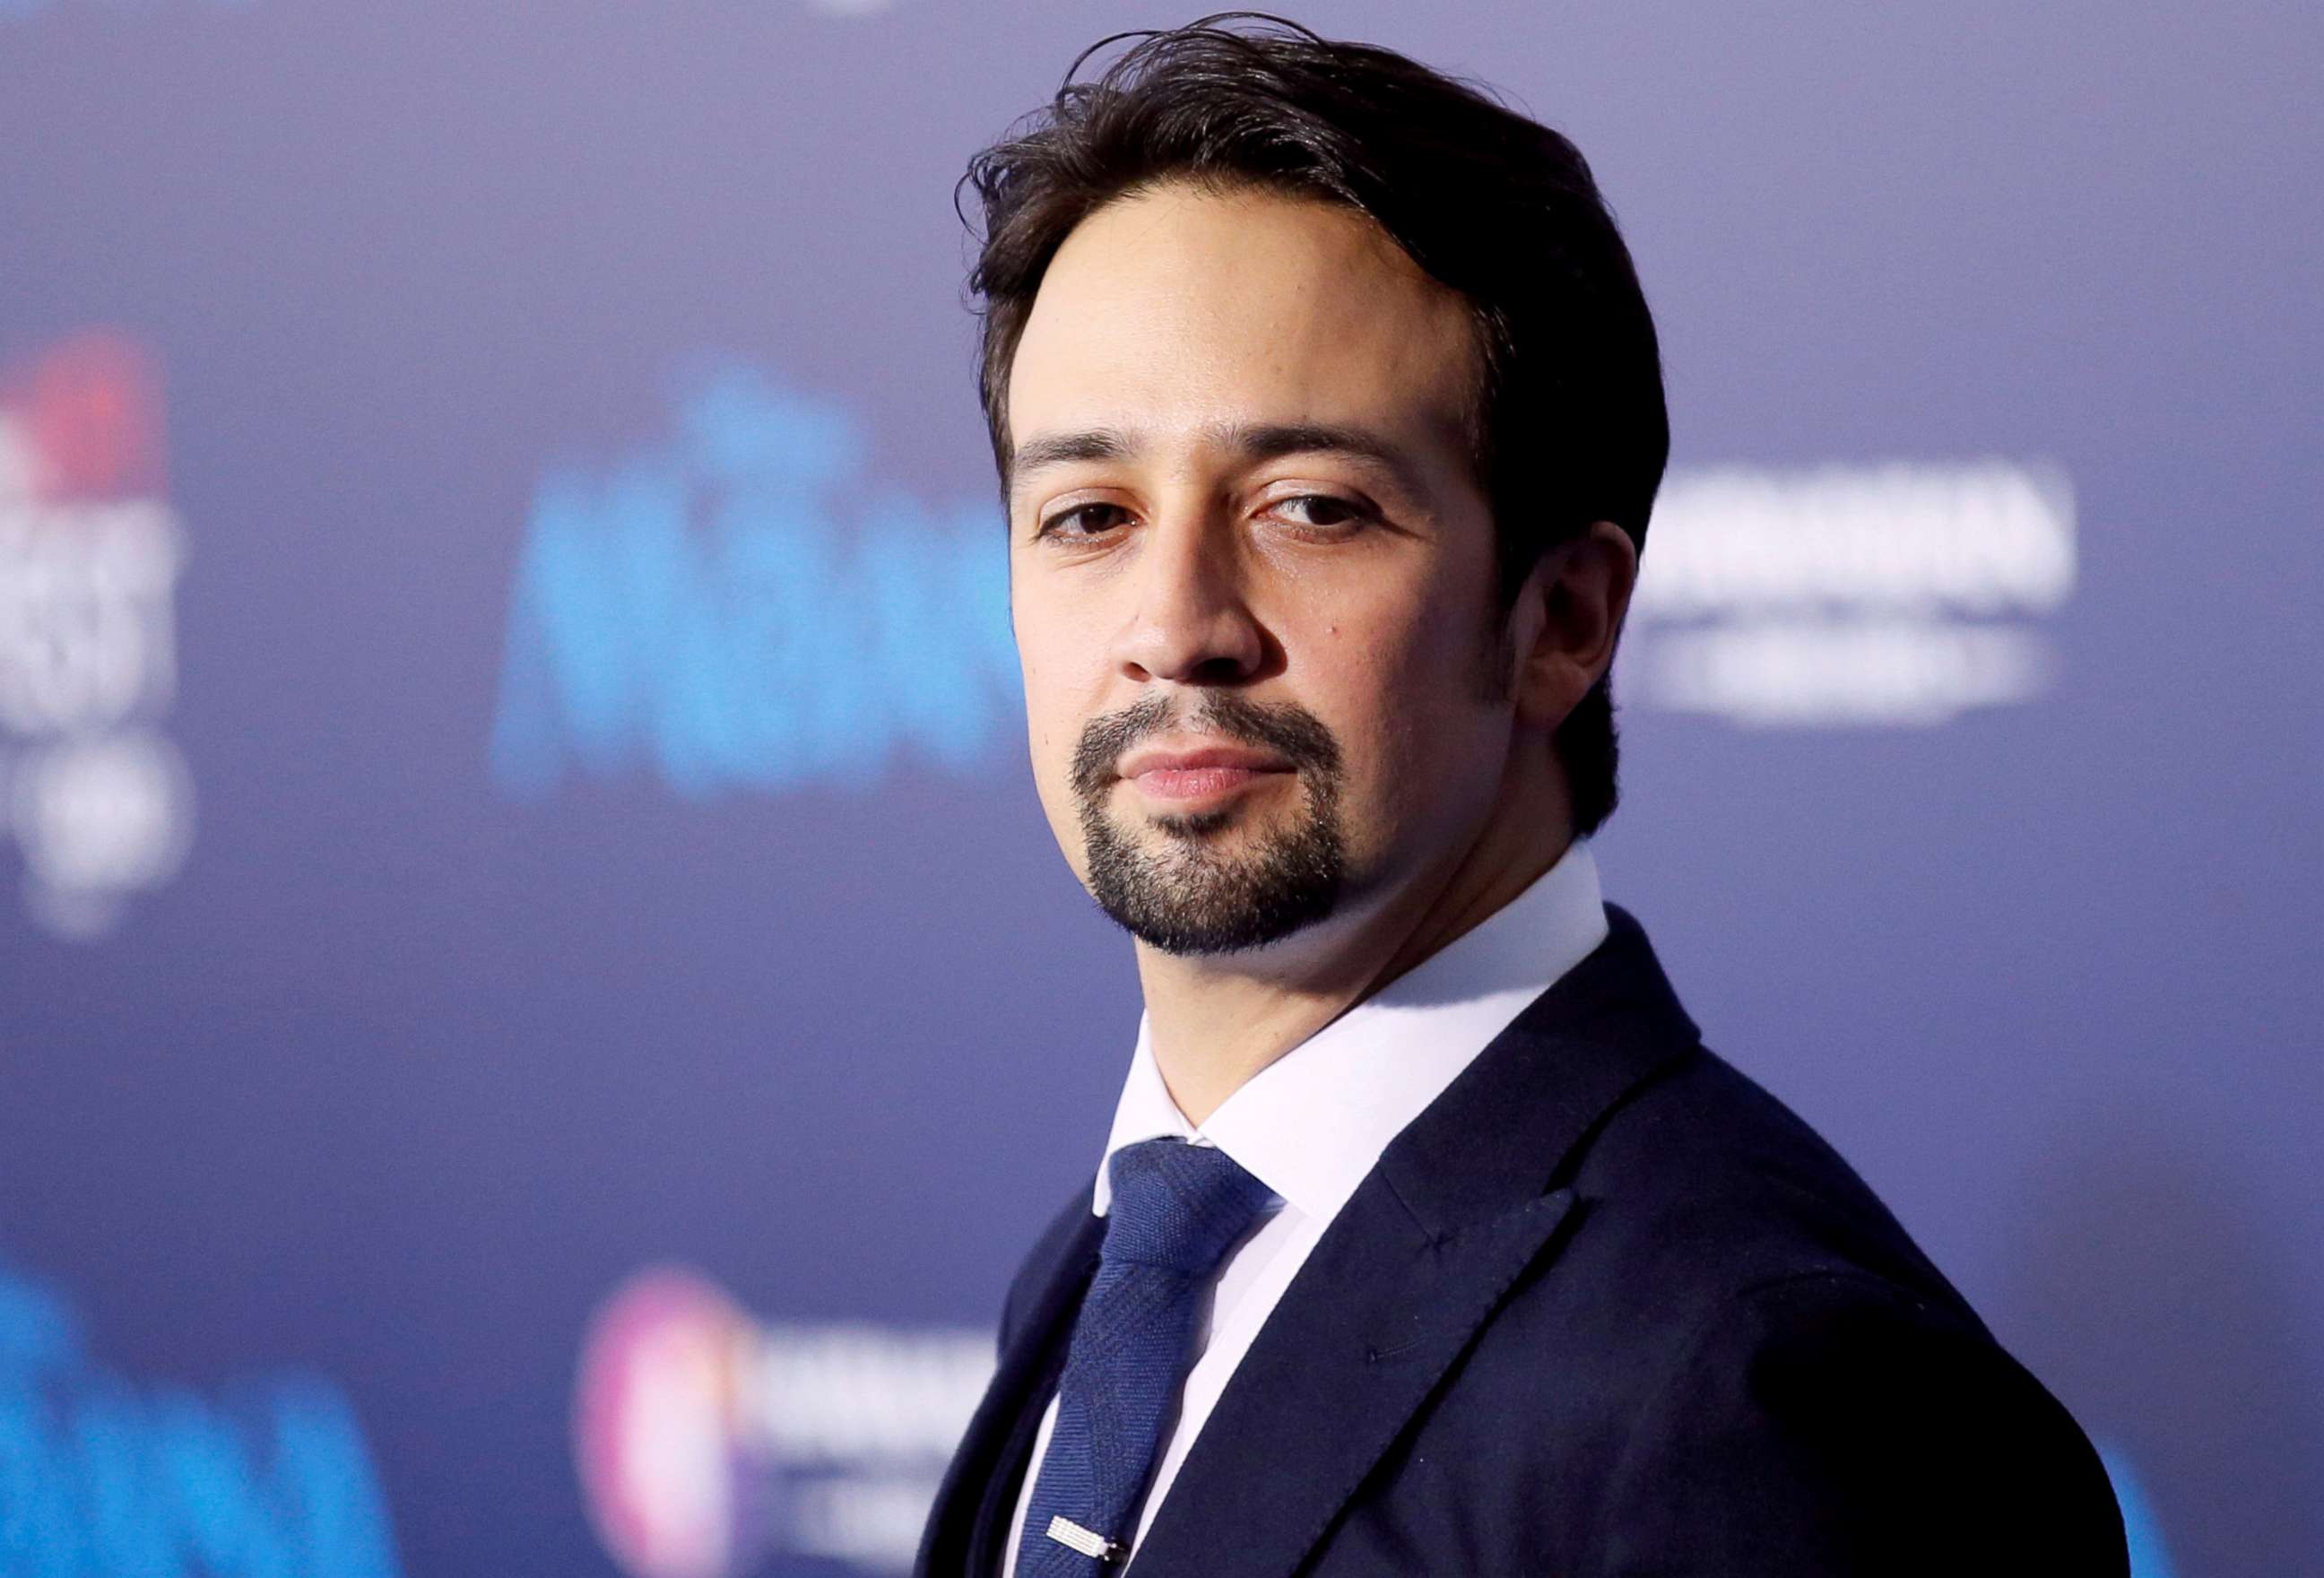 PHOTO: Actor and composer Lin-Manuel Miranda poses at the world premiere of Walt Disney Animation Studios' "Moana" as a part of AFI Fest in Hollywood, Calif., Nov. 14, 2016.